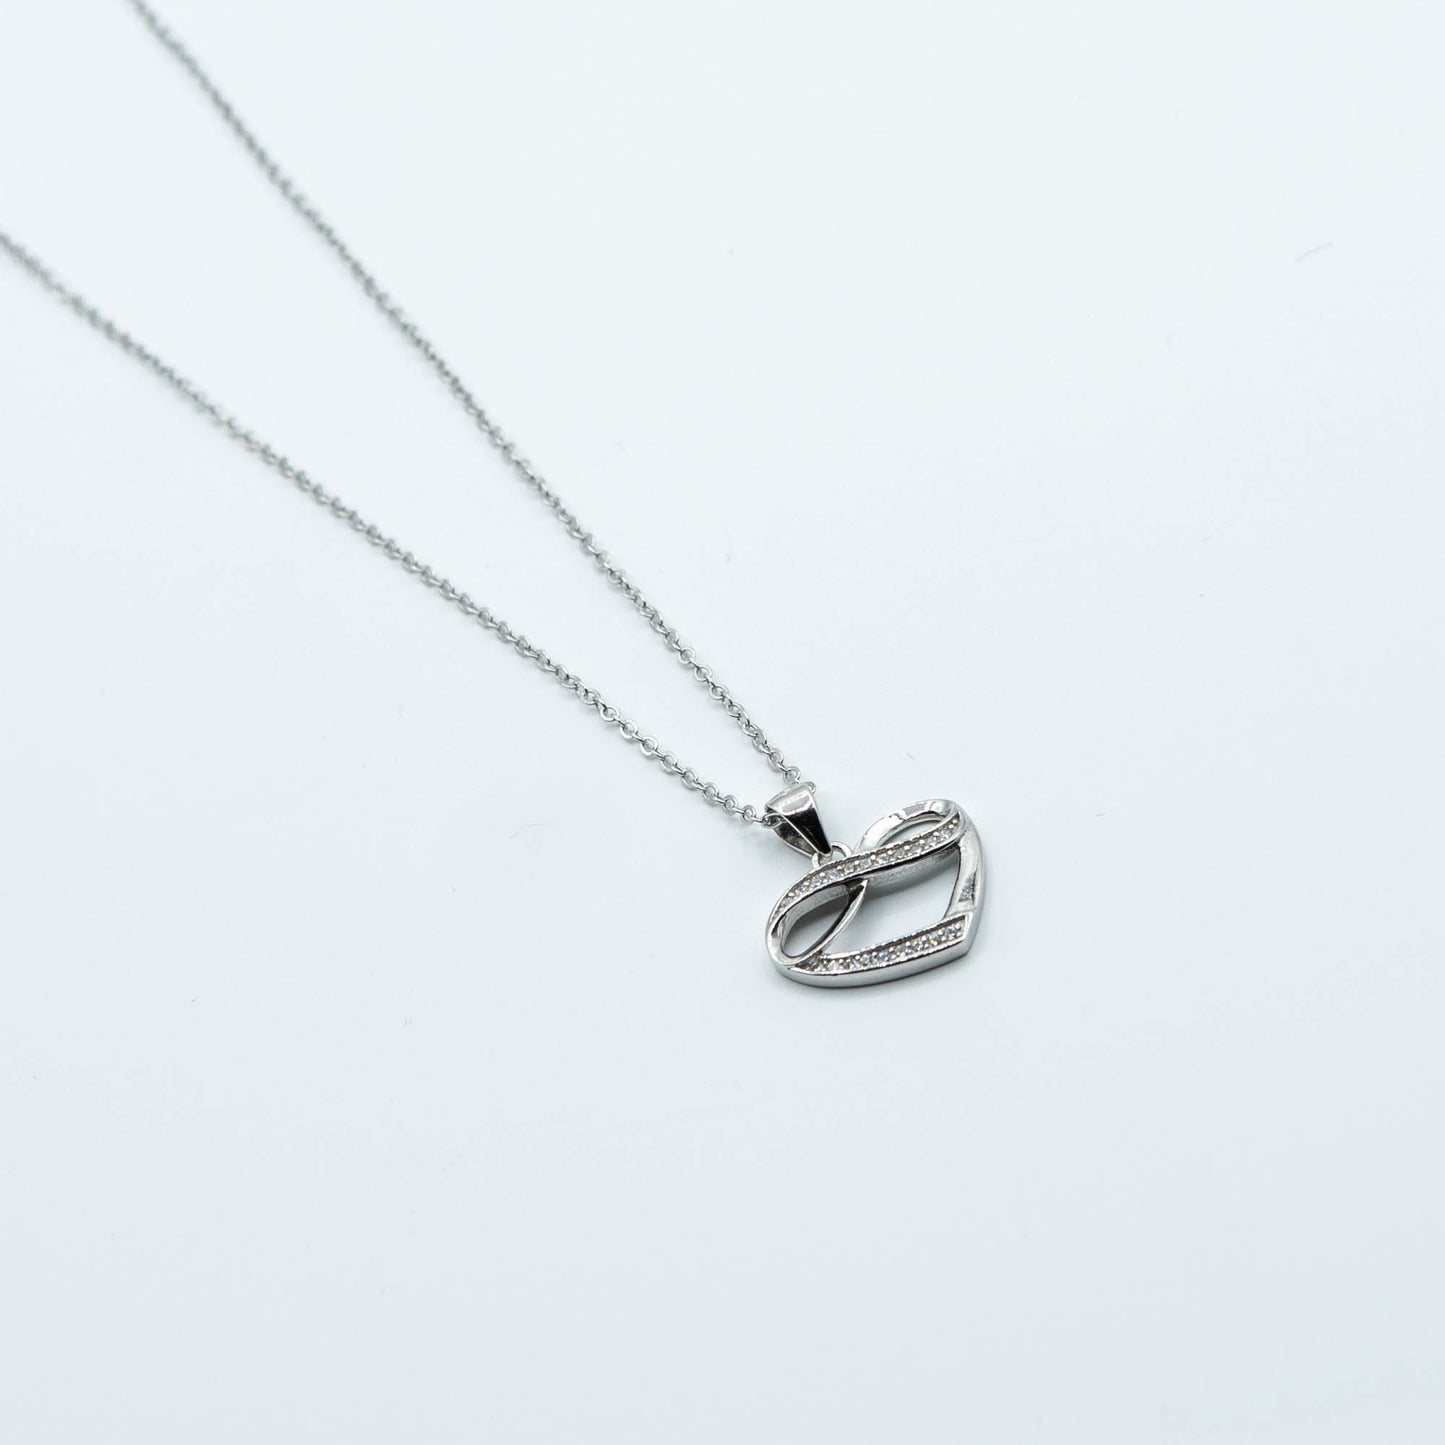 DK-925-444 heart with infinity necklace